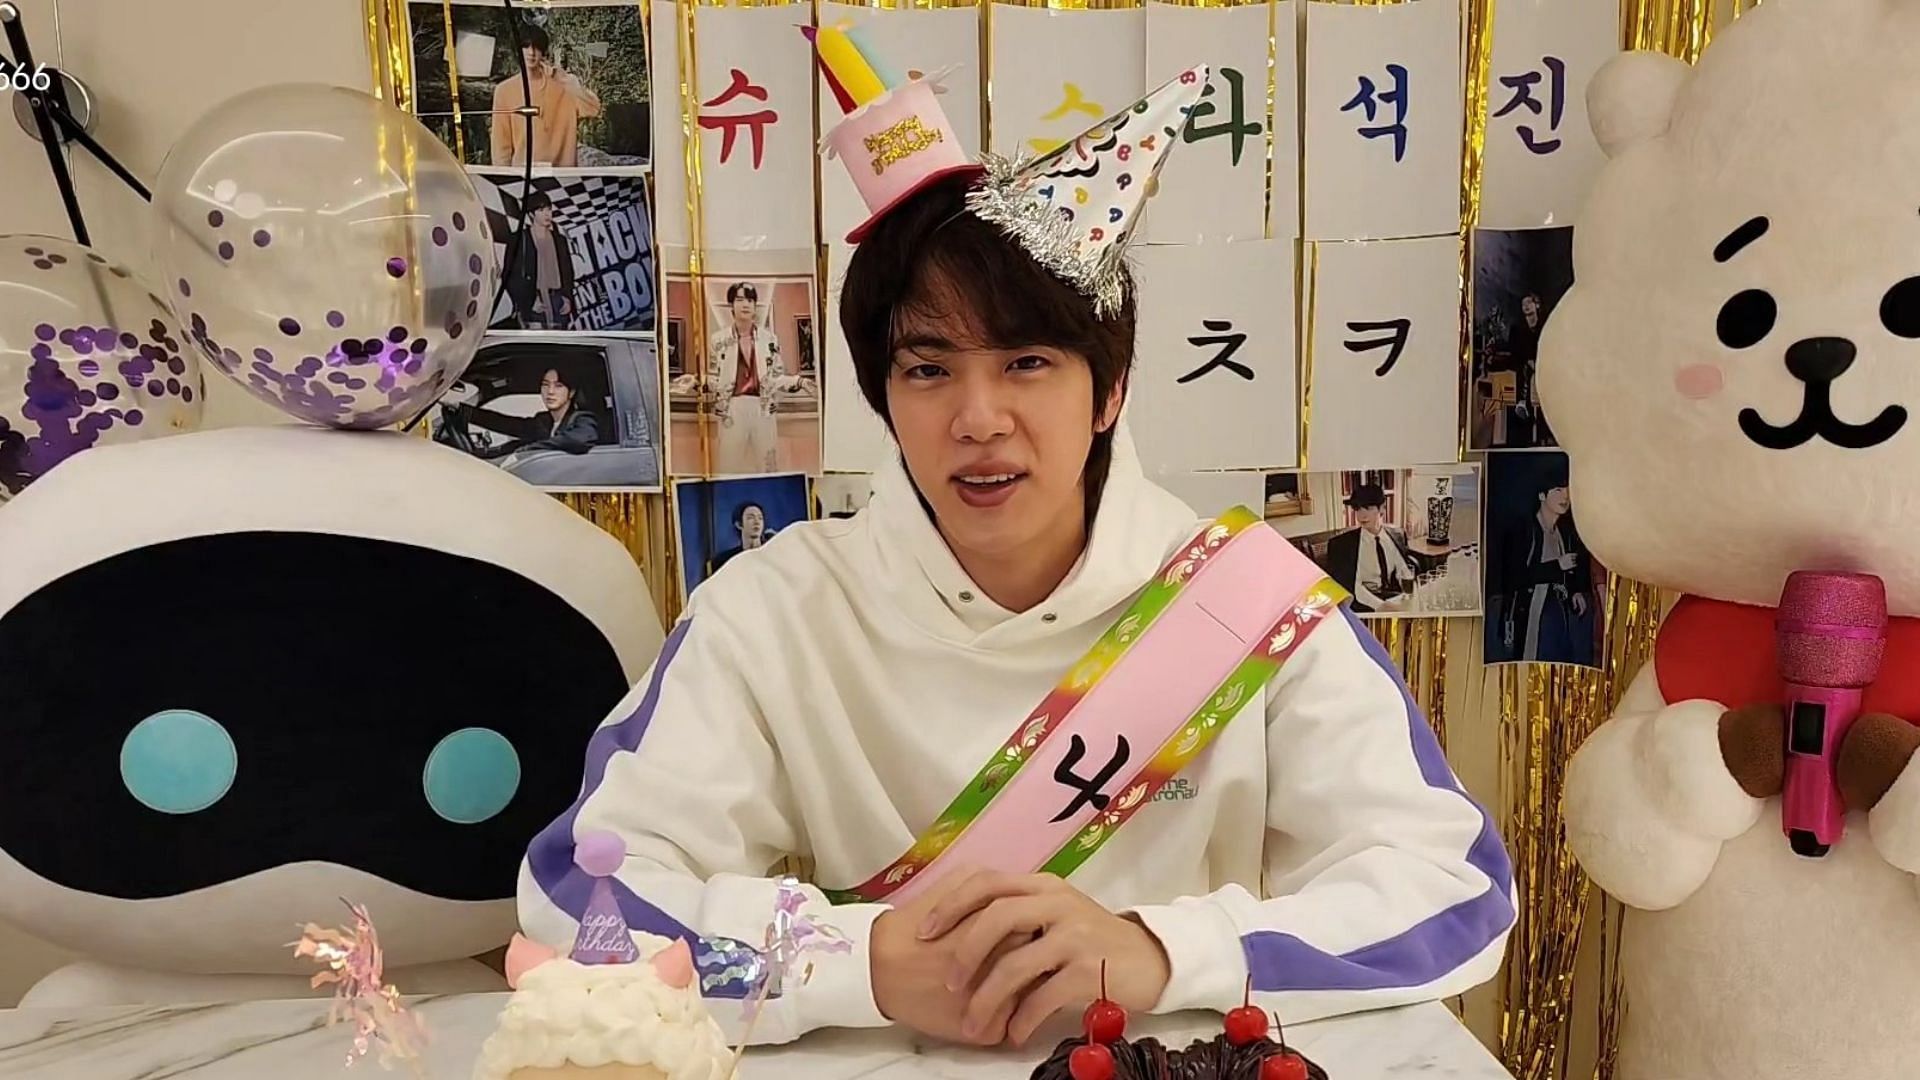 Louis Vuitton And LEGO Send BTS's Jin A Birthday Gift - Koreaboo